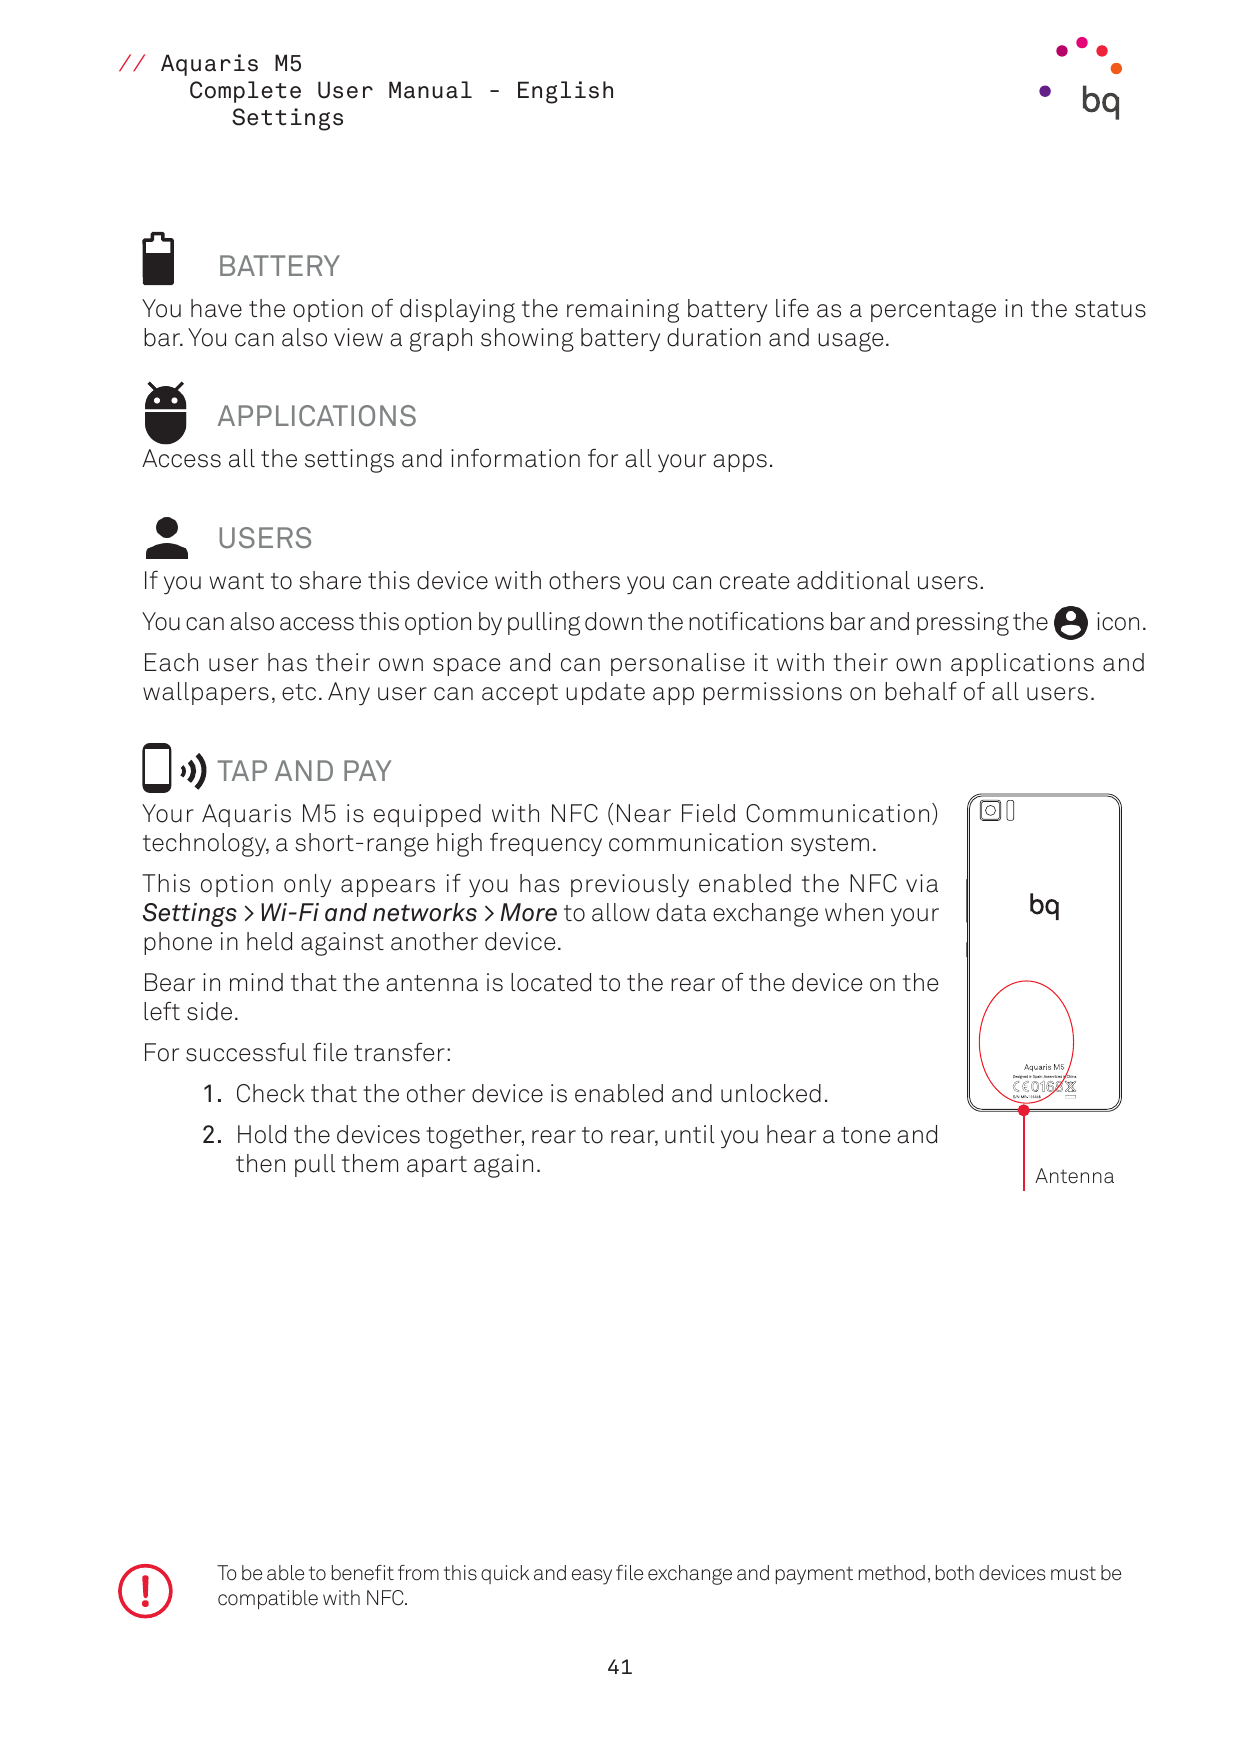 // Aquaris M5Complete User Manual - EnglishSettings BATTERYYou have the option of displaying the remaining battery life as a per